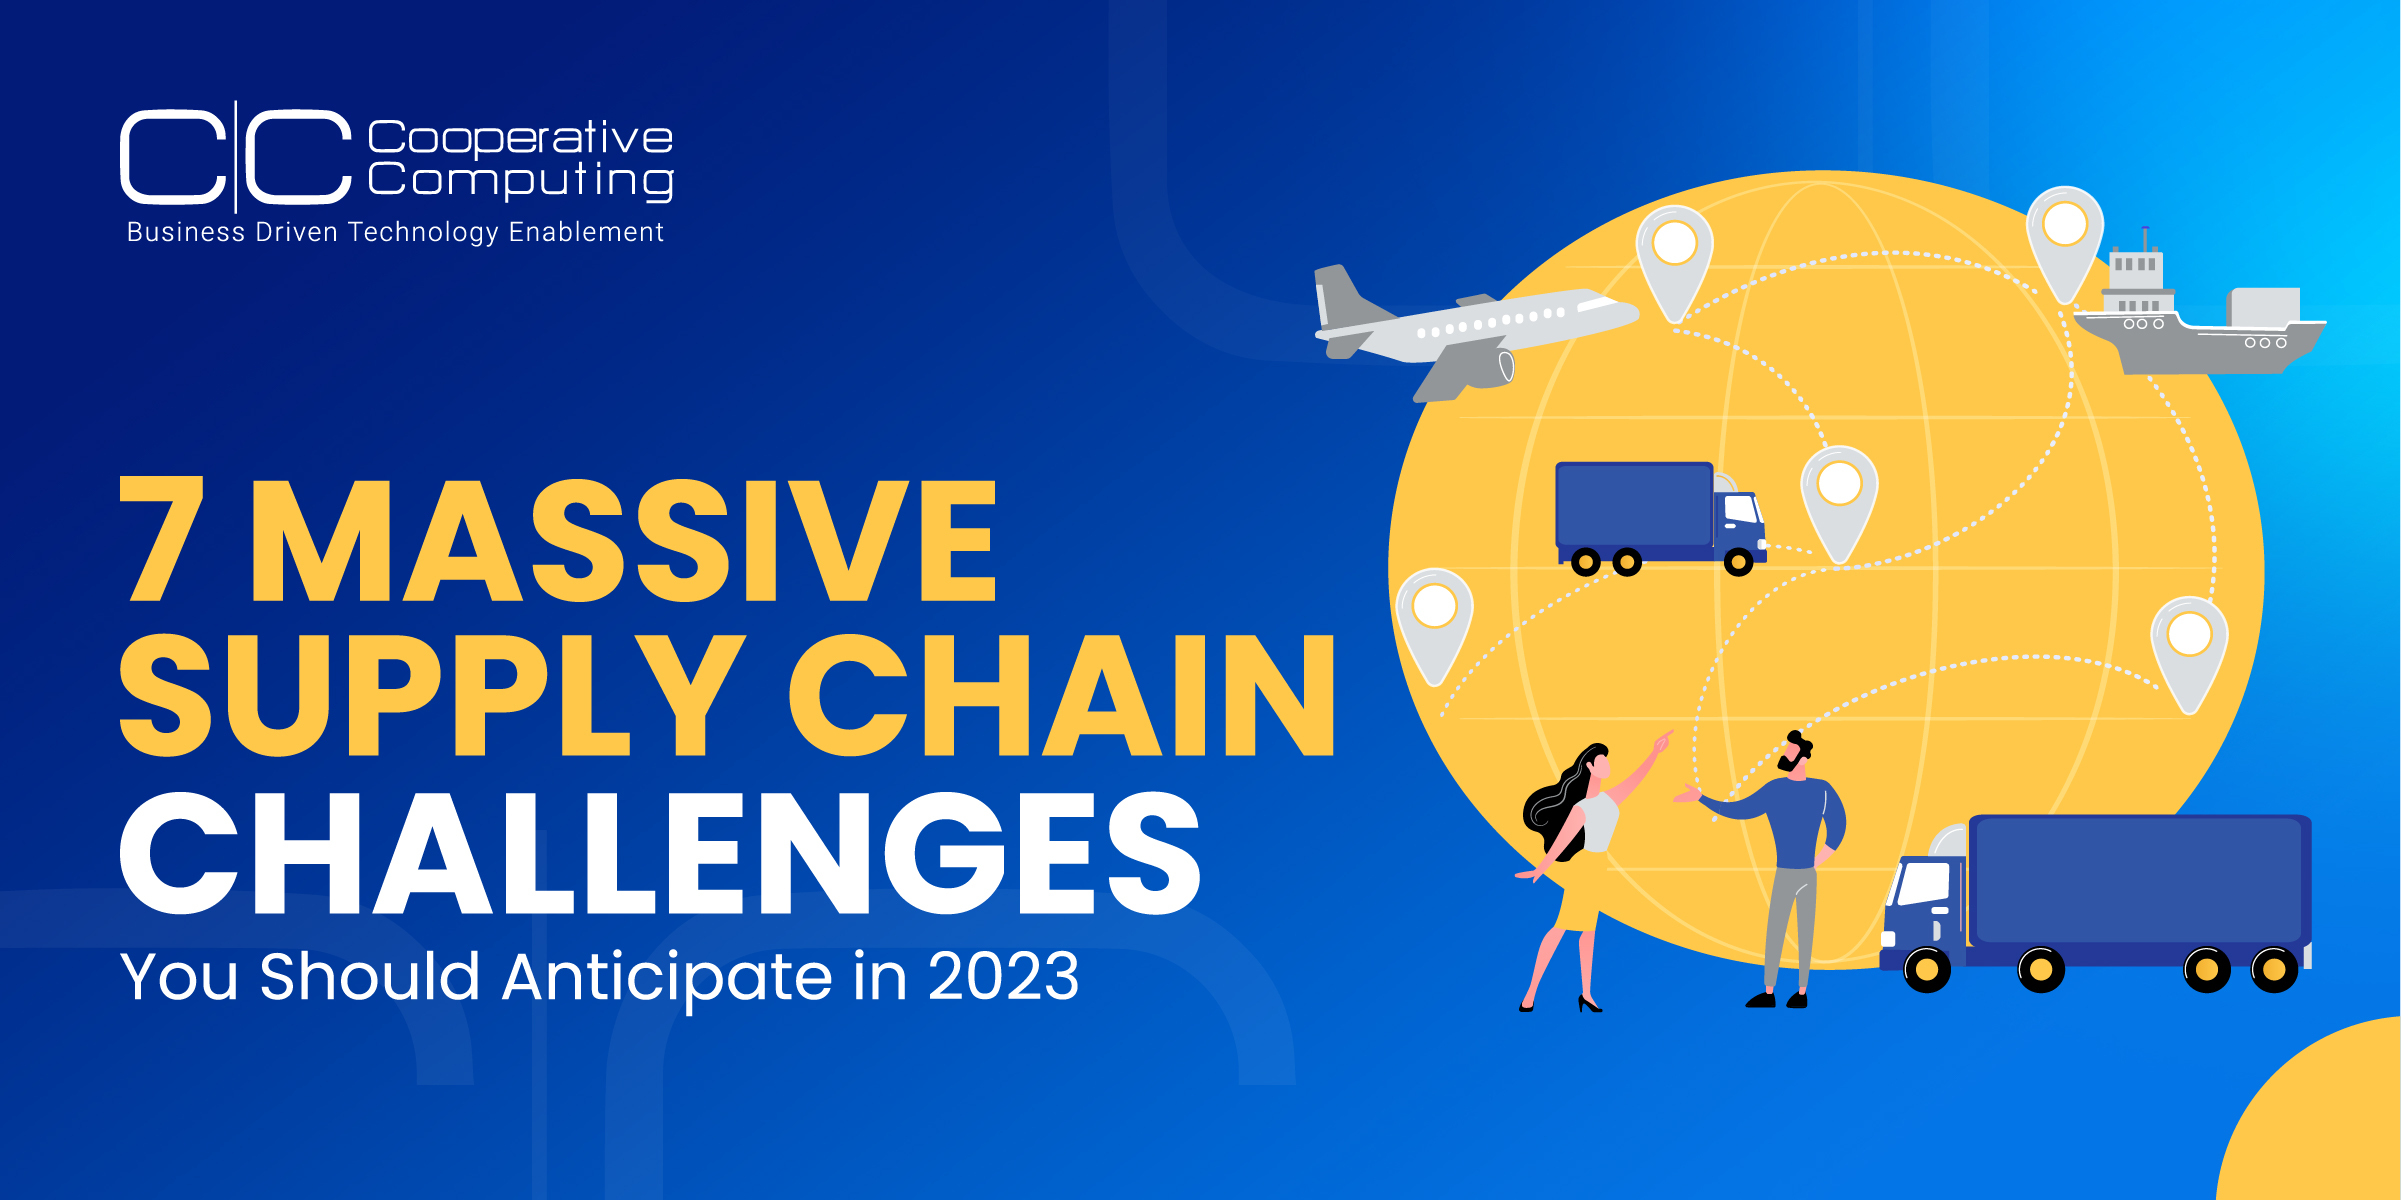 7 Massive Supply Chain Challenges You Should Anticipate in 2023